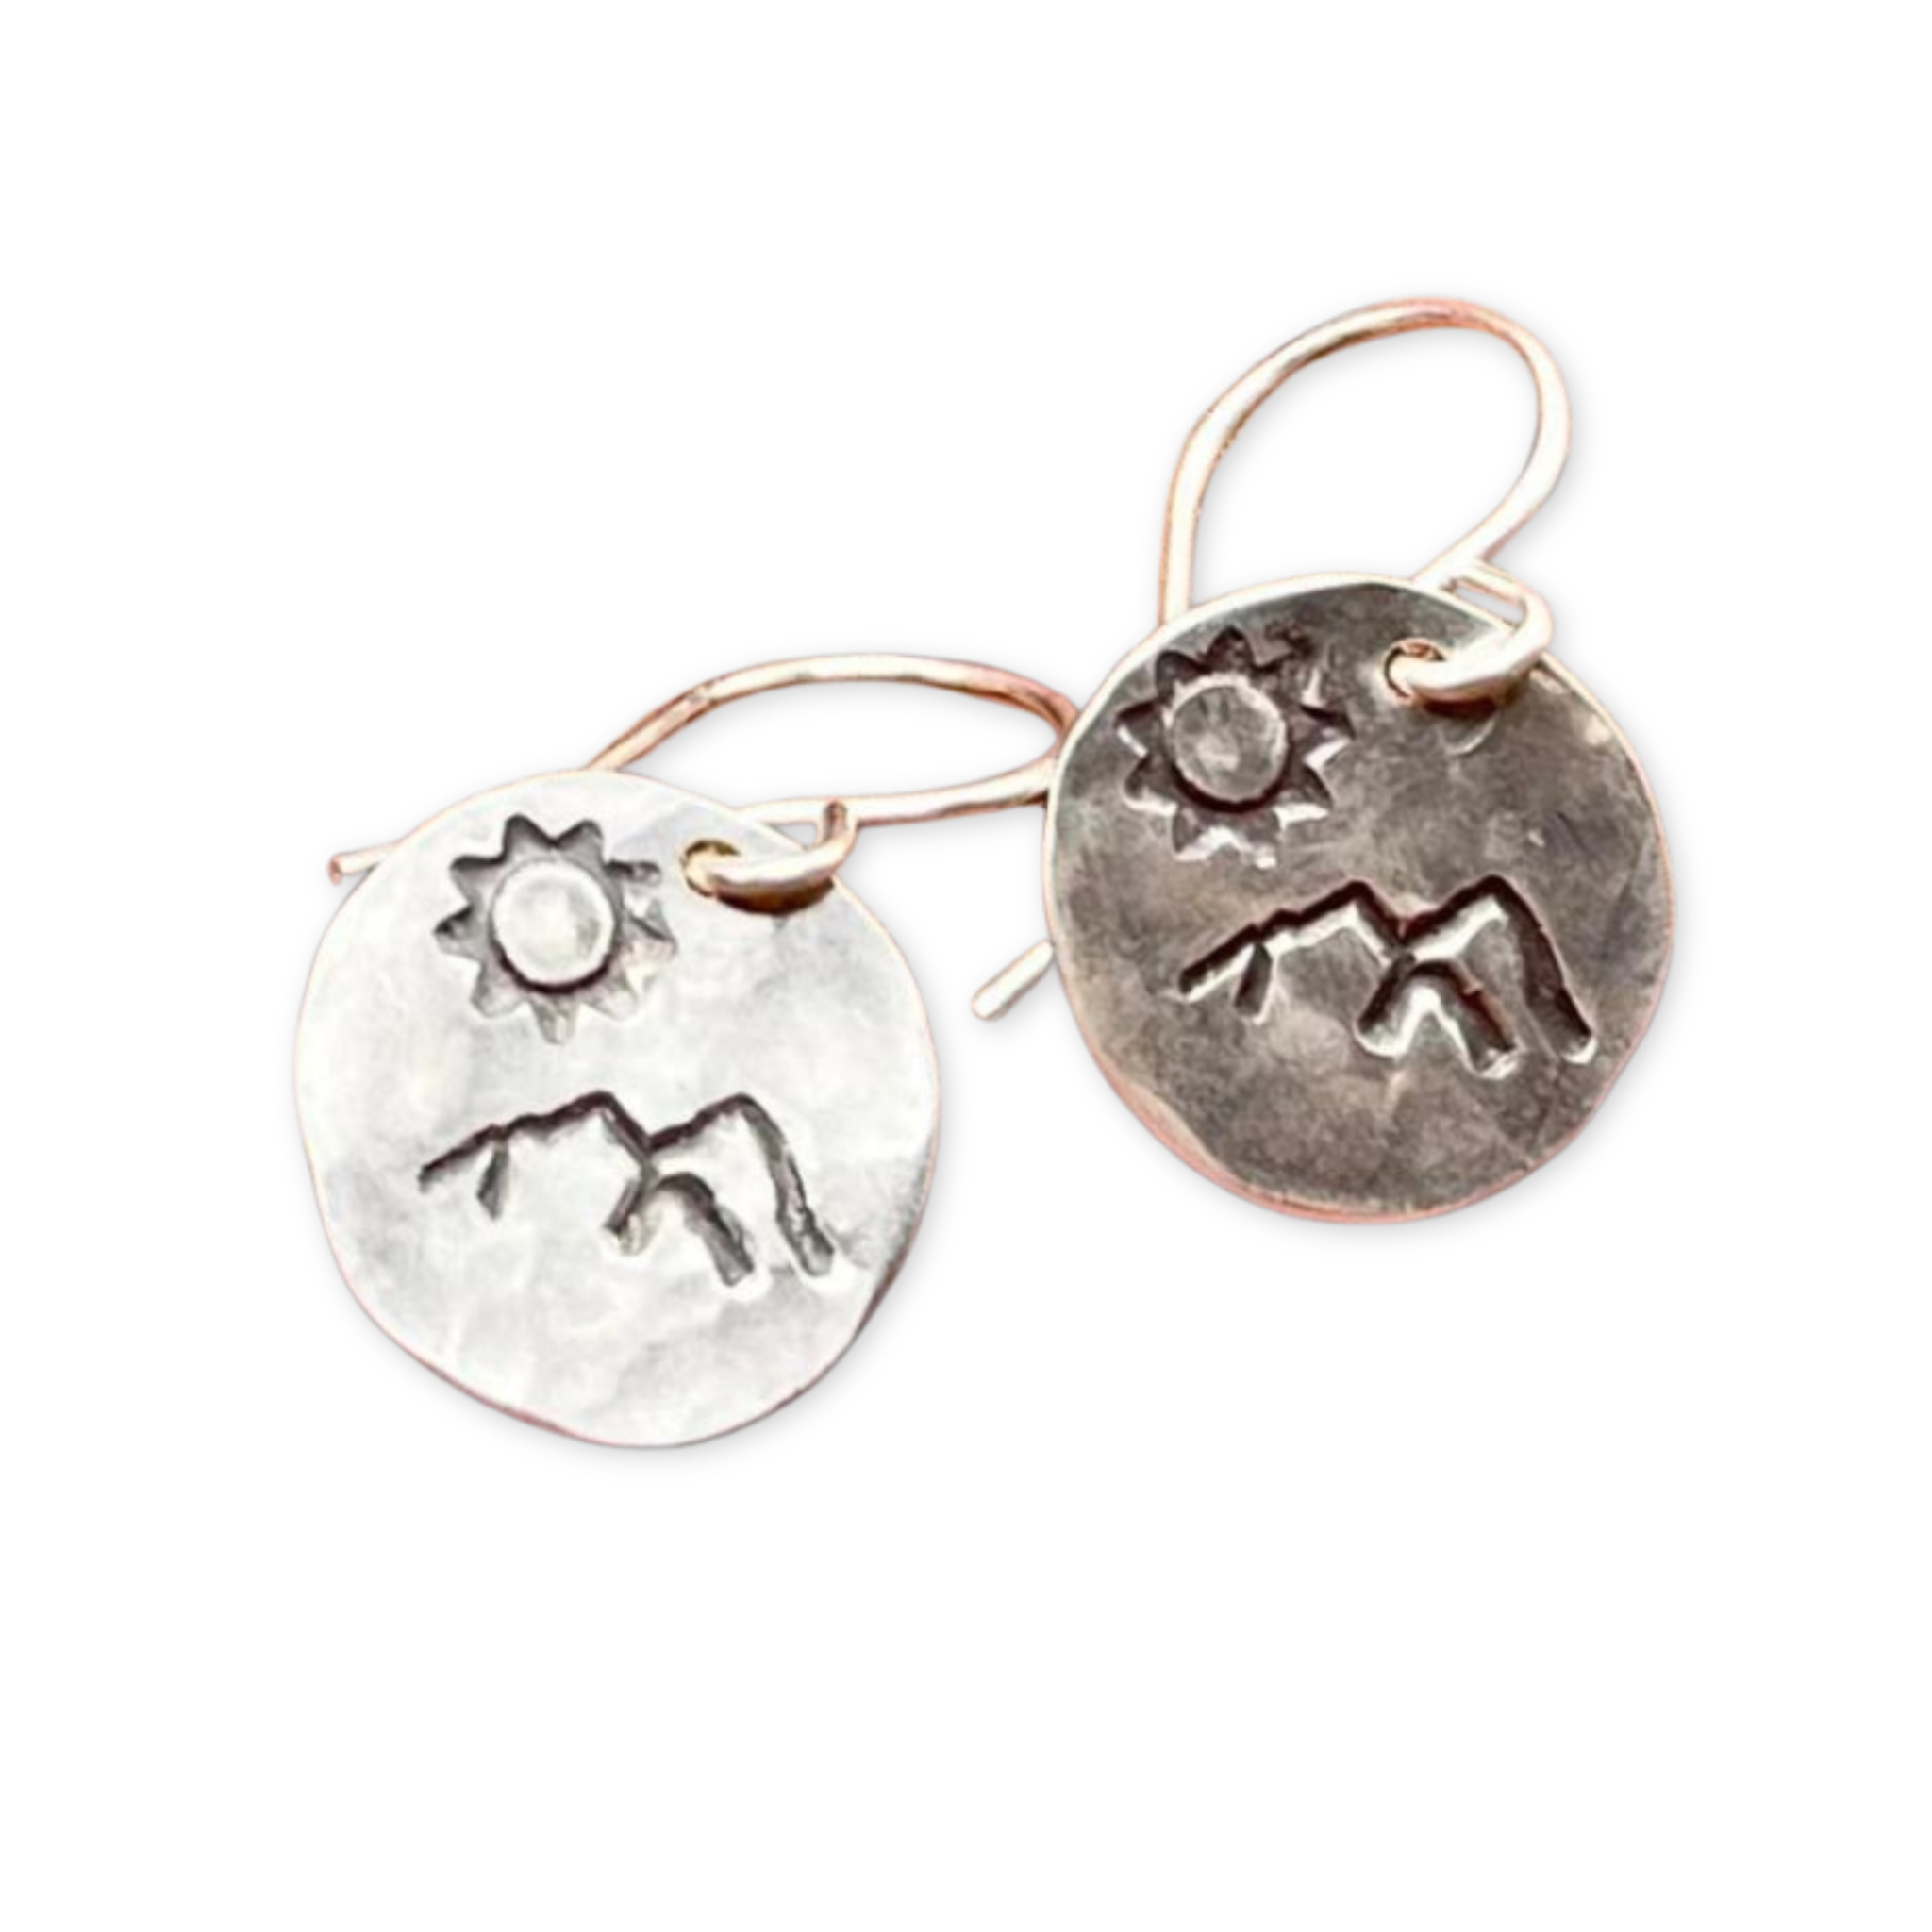 earrings with round hammered disc with a stamped mountain and sun